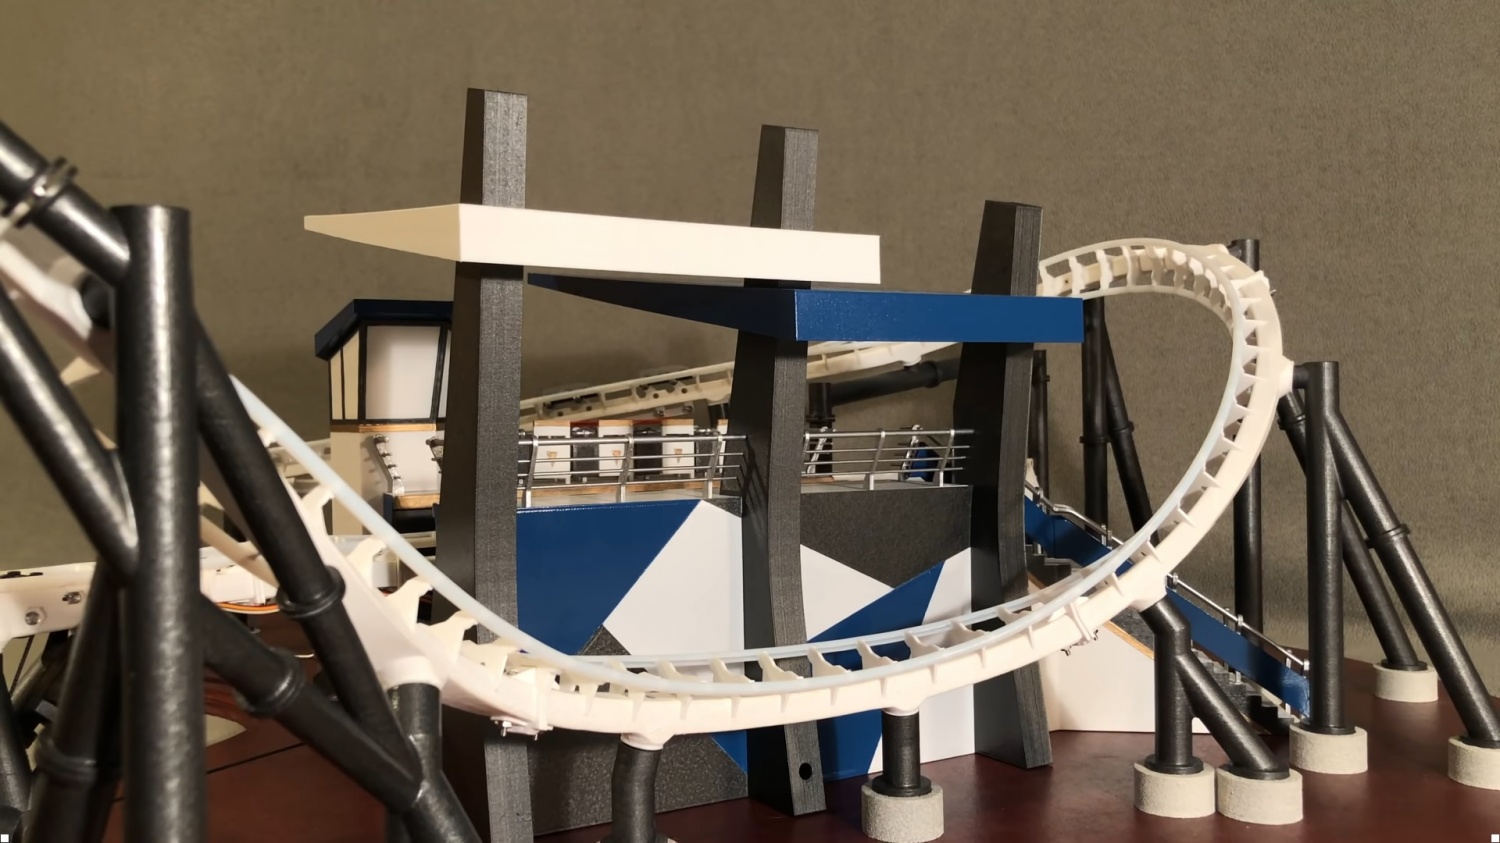 3D-Printed Roller Coaster: YouTuber Shares Model of Amusement Ride Which Took Over 900 Hours to Create                                                                                                  